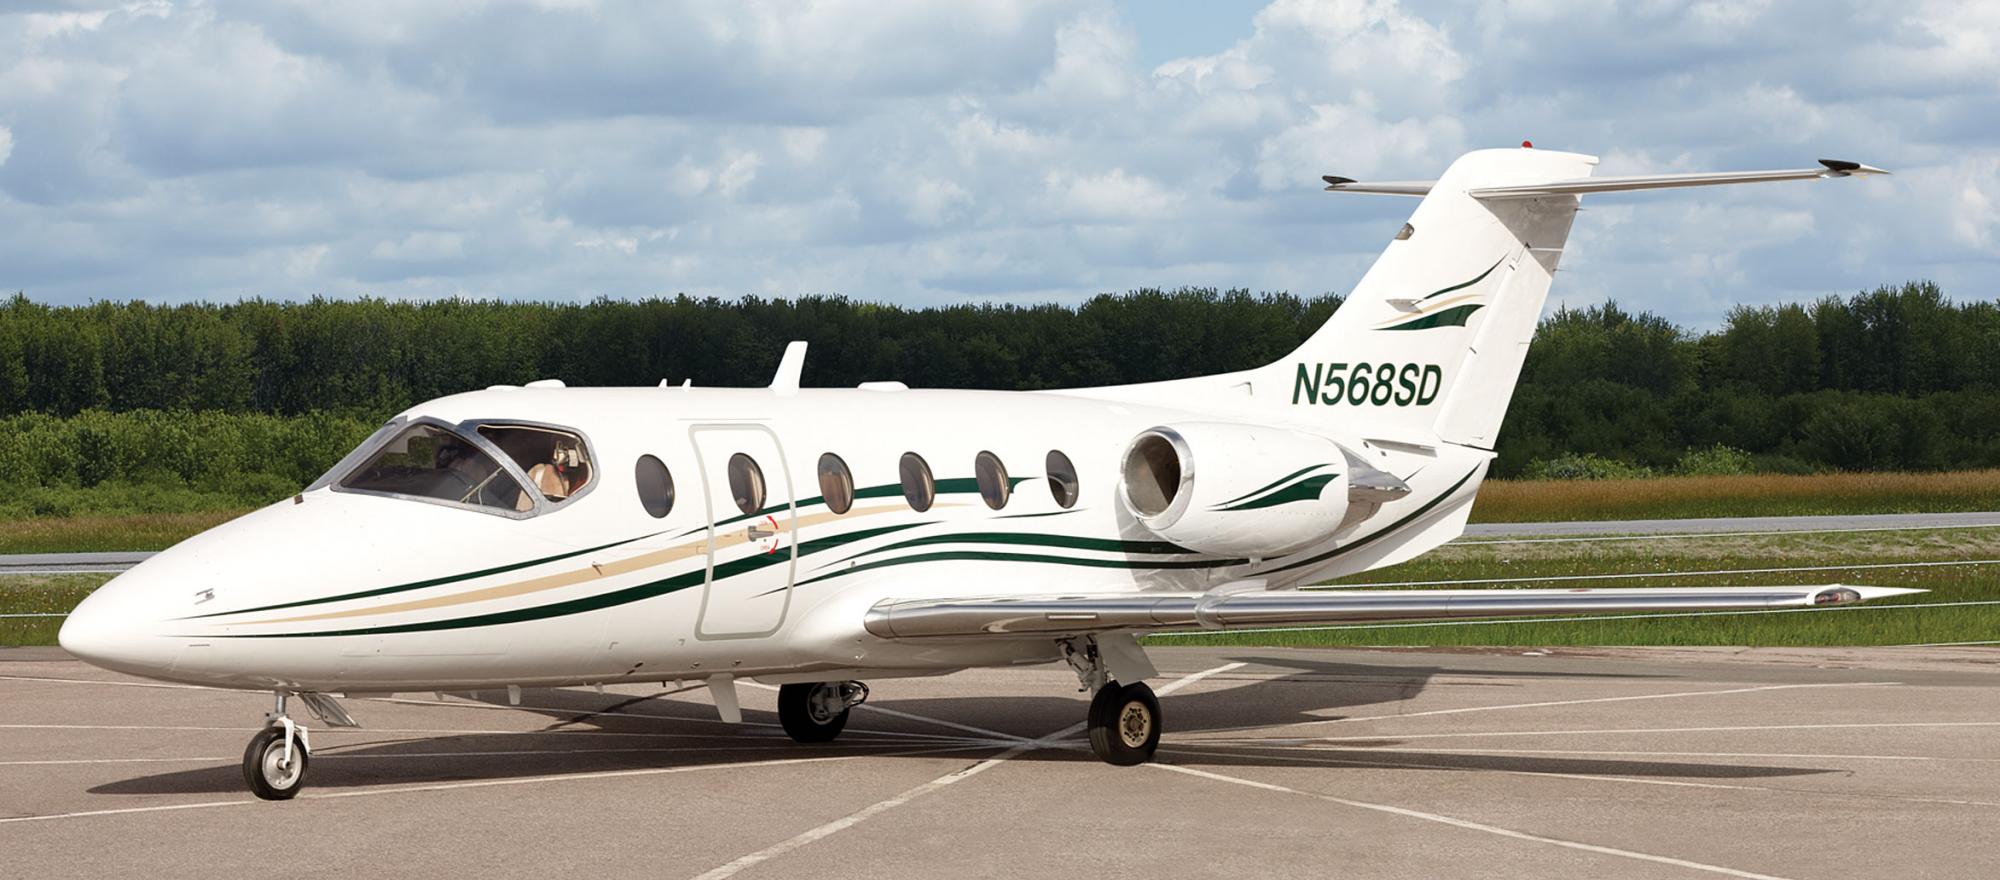 You can get some major deals on Diamonds and Beechjets made before 1991, but there’s a reason for that.